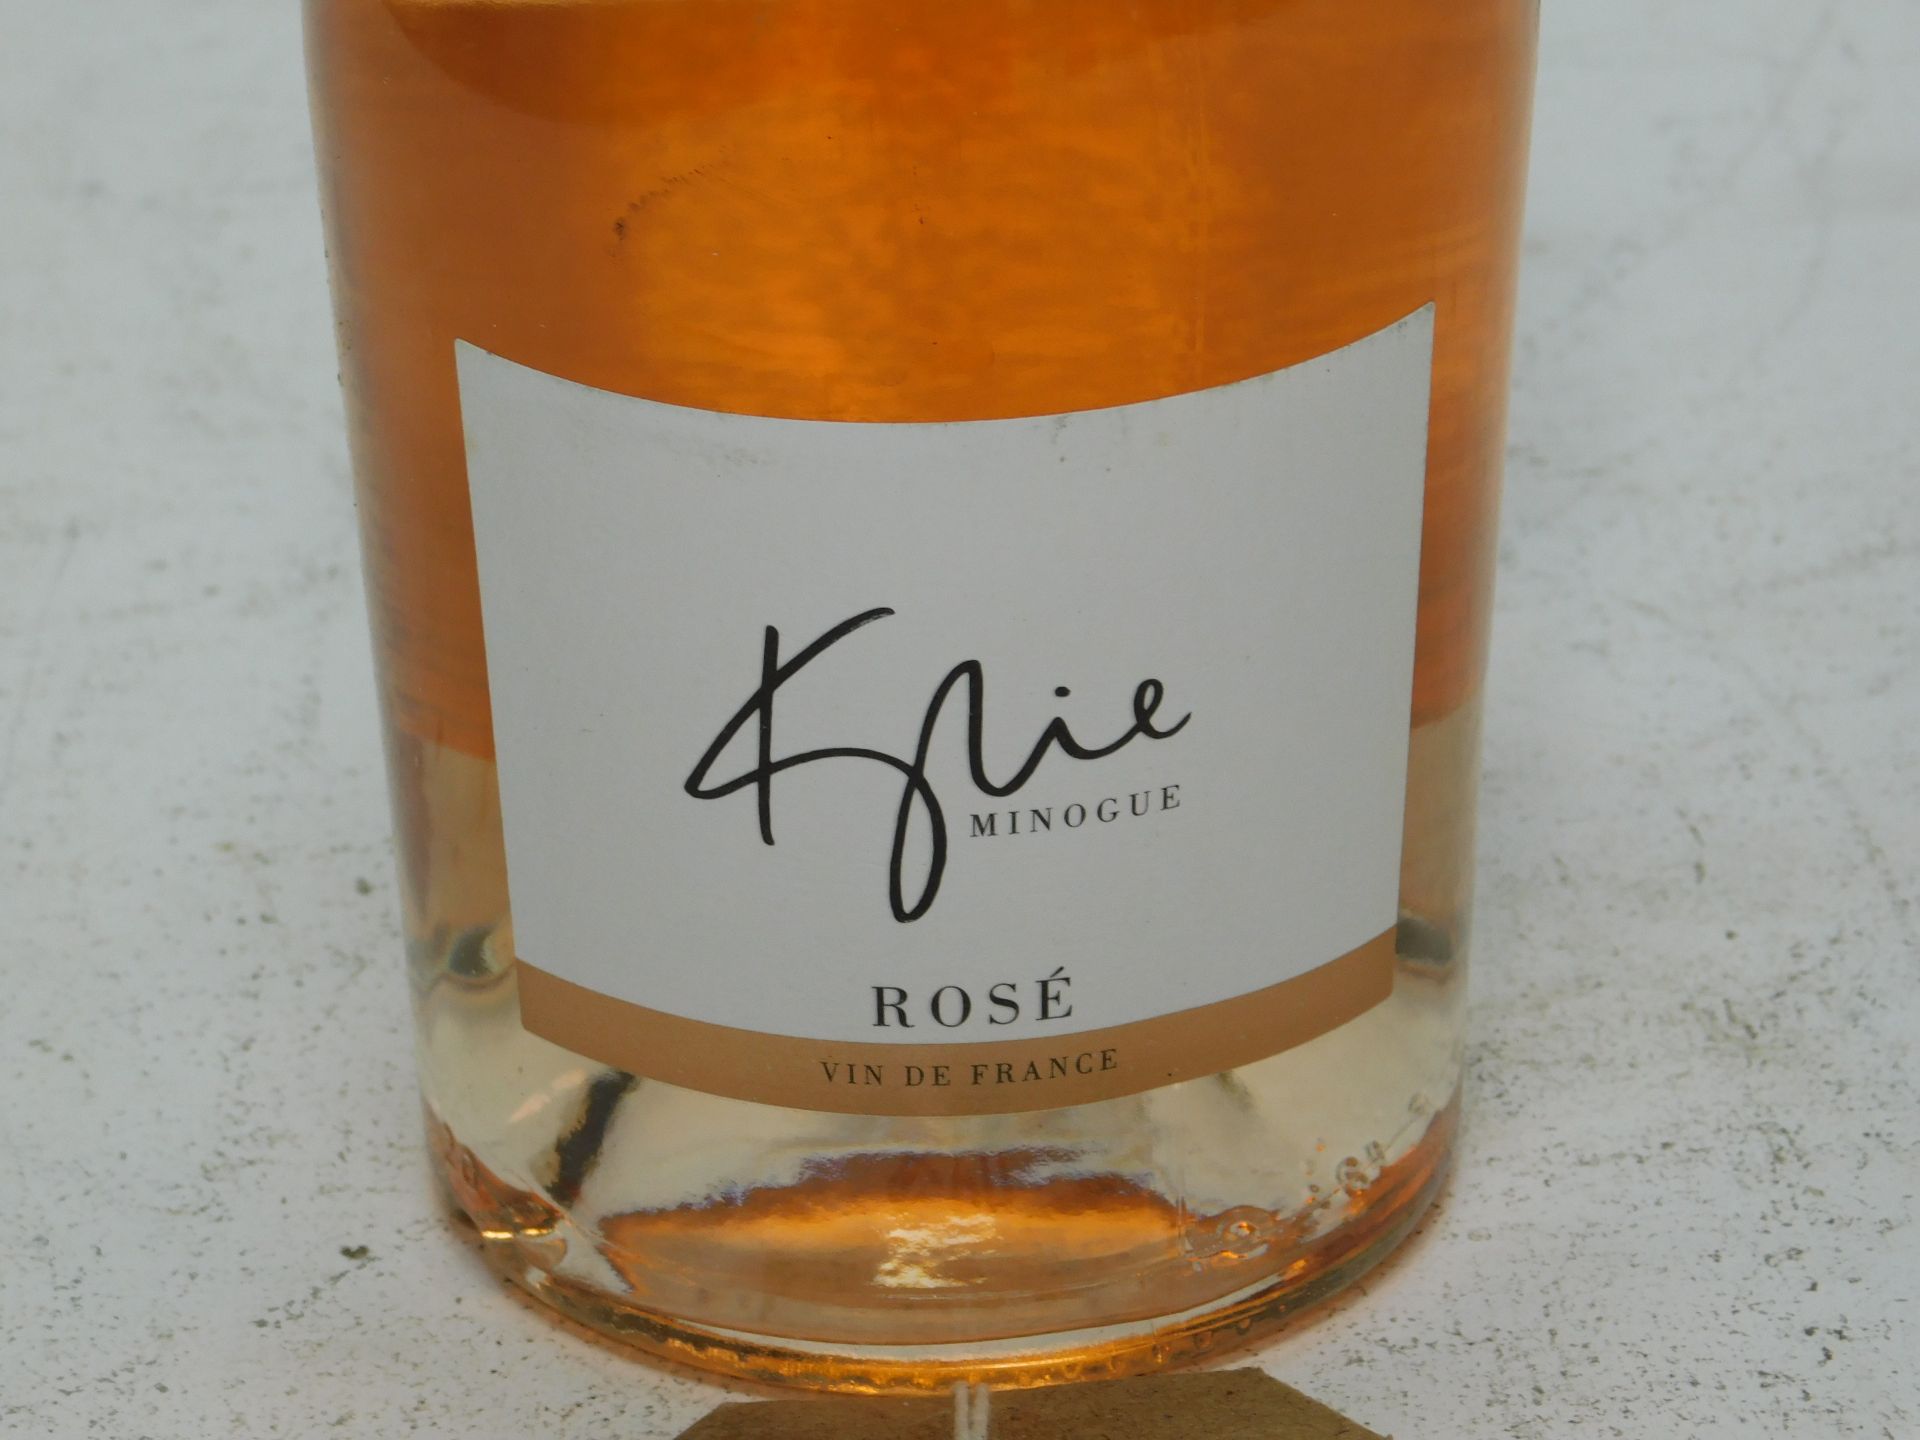 9 Kylie Minogue Vin de France Rose 2020 (Location: Brentwood. Please Refer to General Notes) - Image 2 of 2